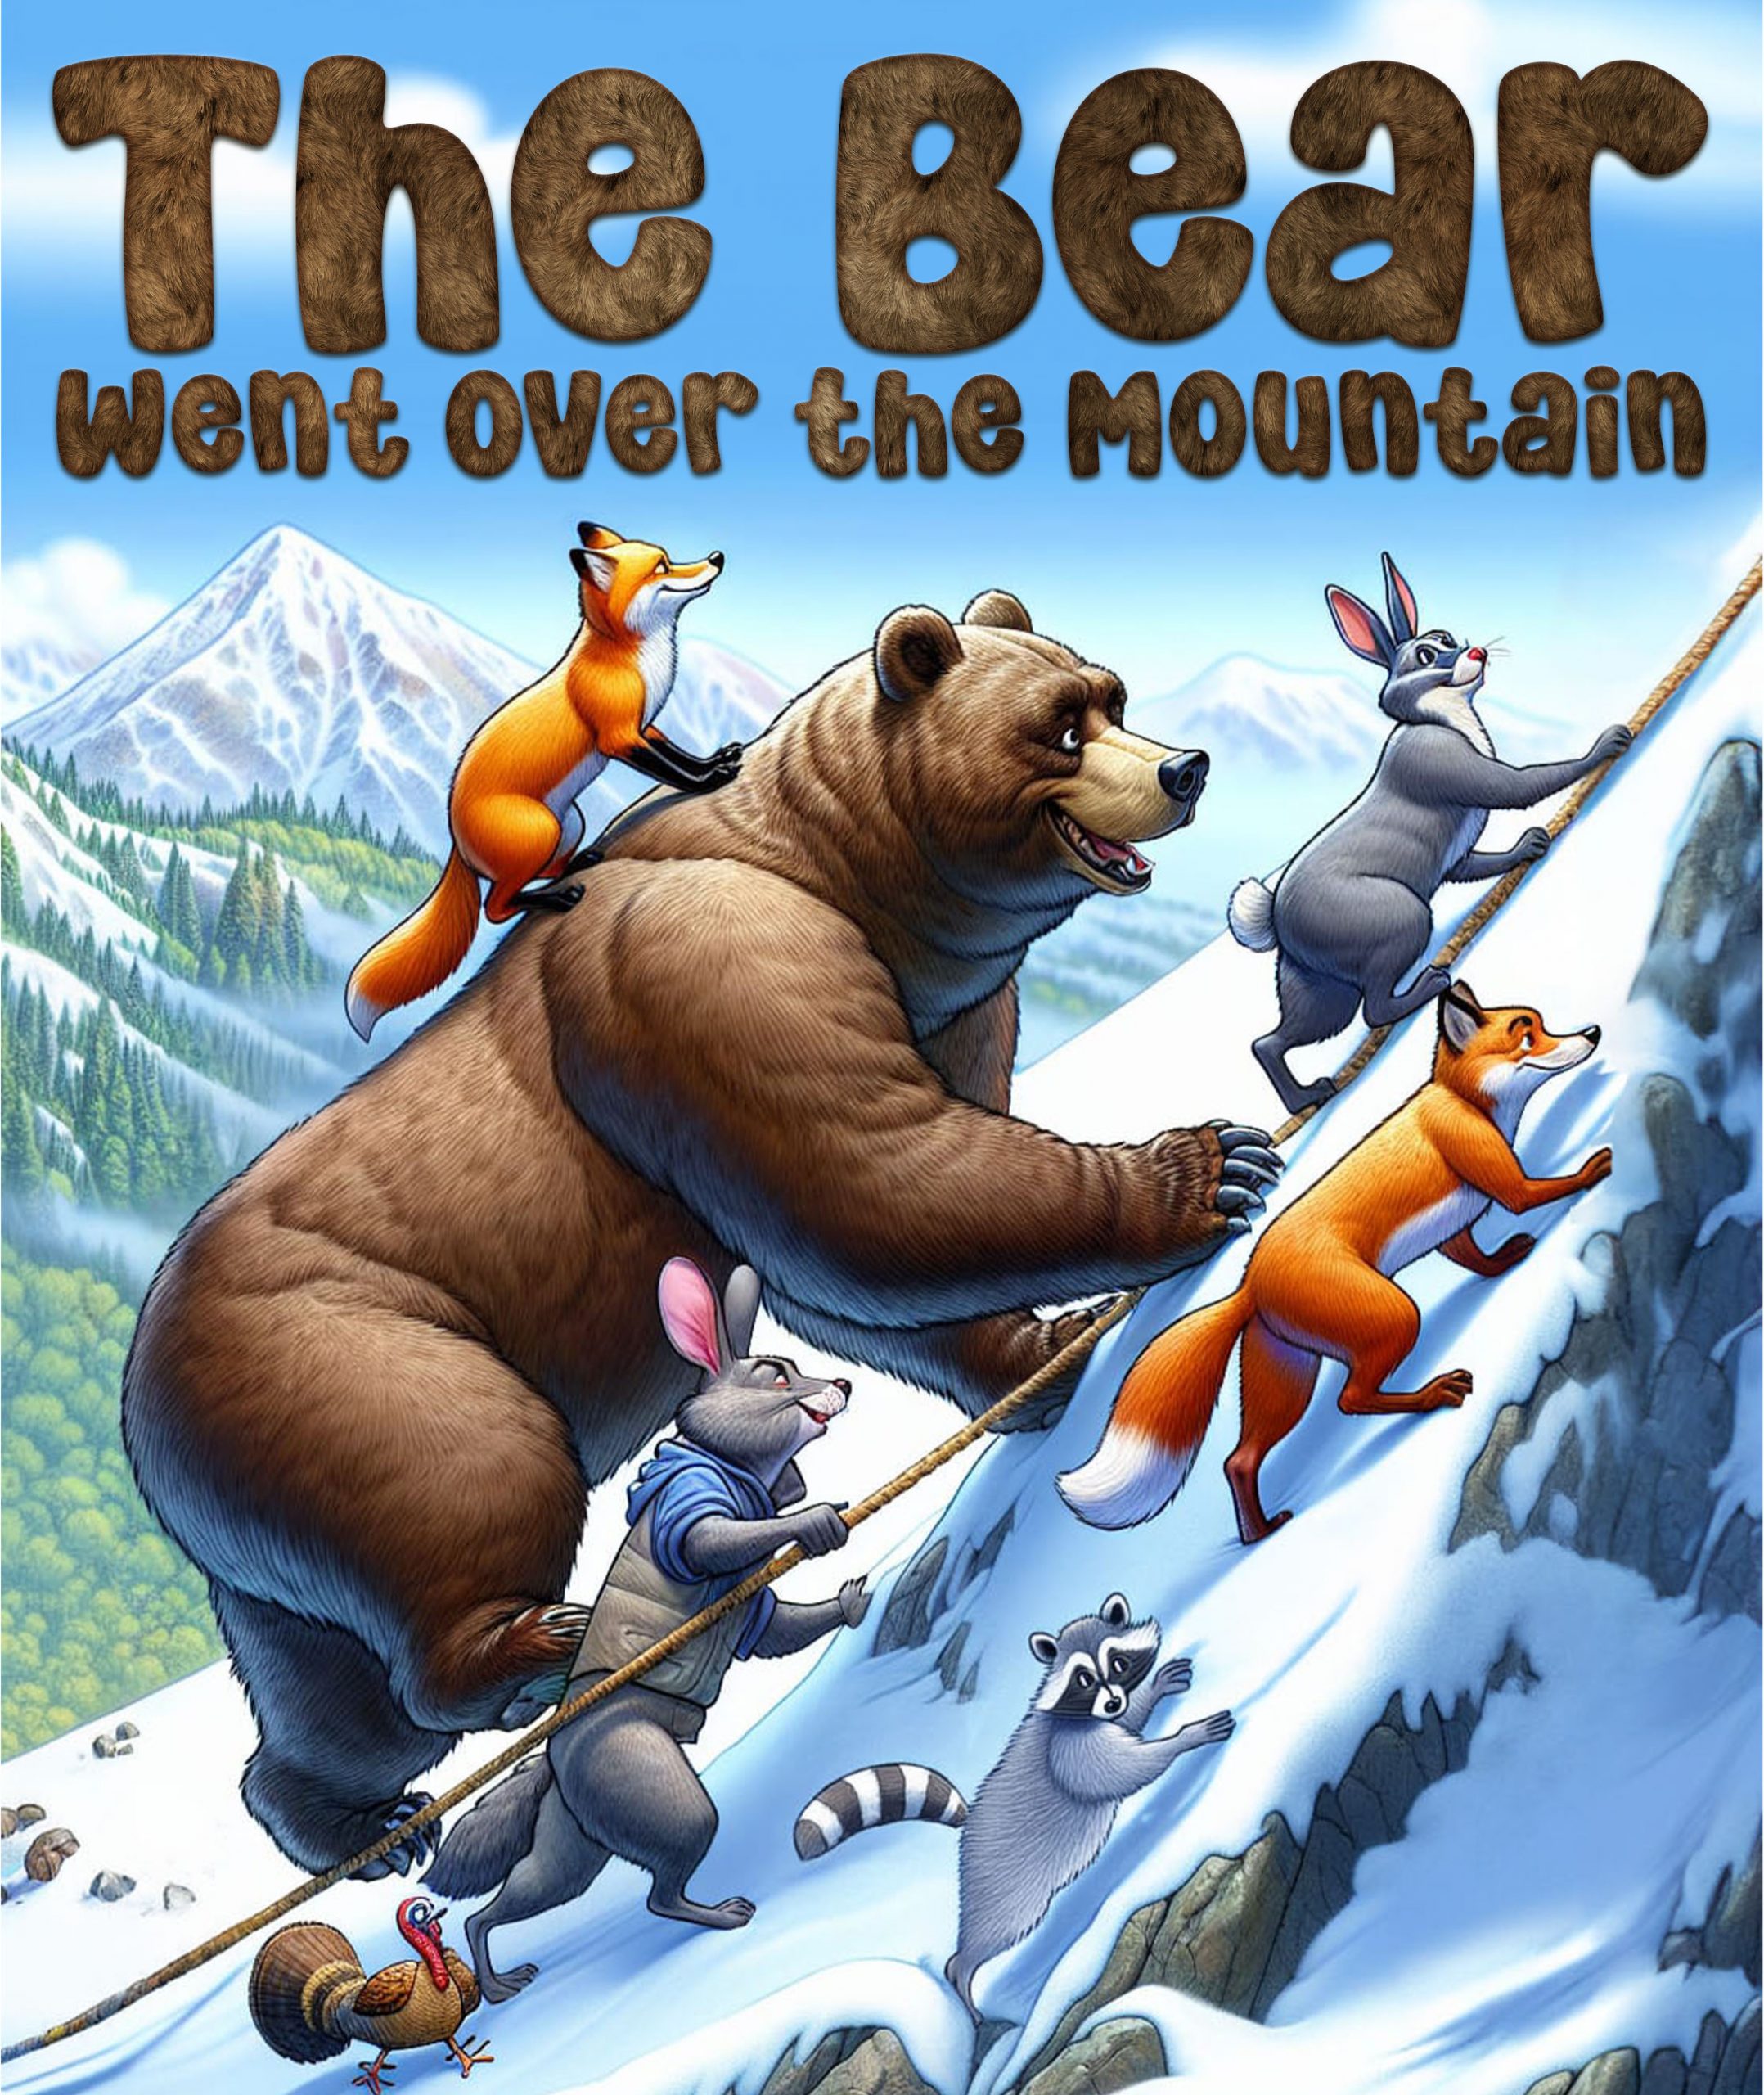 Artwork for "The Bear Went Over the Mountain"